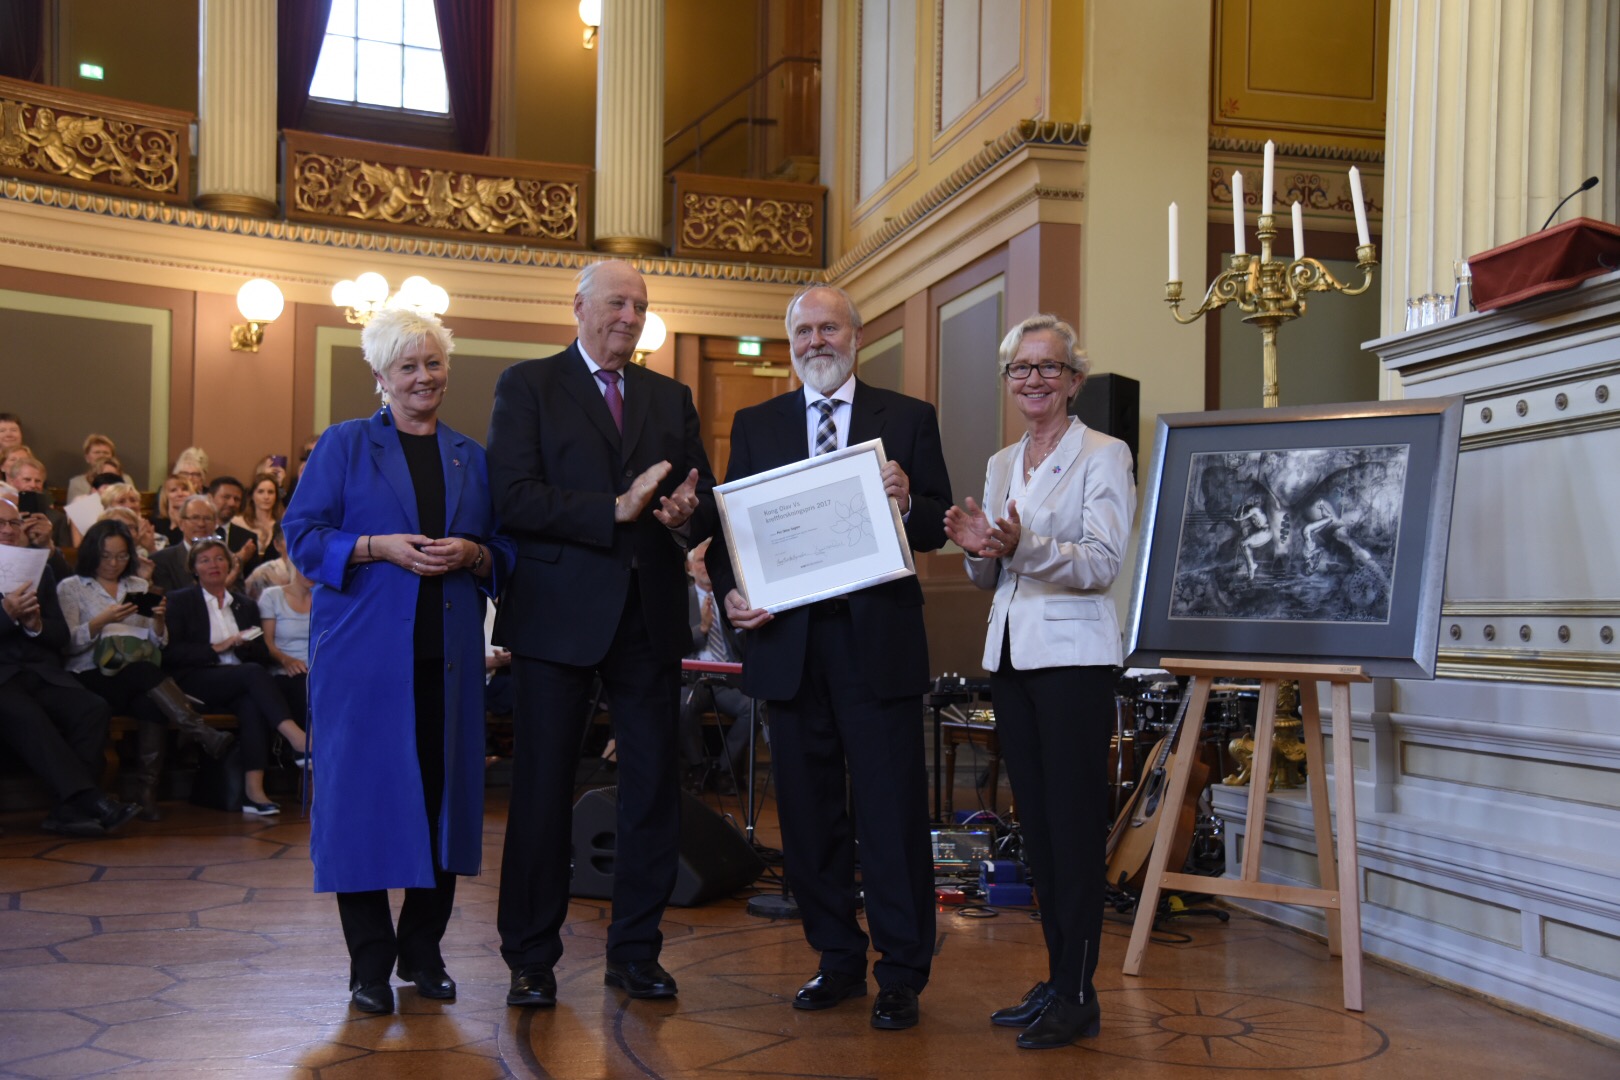 Per Ottar Seglen received the award from H.M. King Harald V and was congratulated by Anne Lise Ryel and Gunn-Elin Aa. Bjørneboe